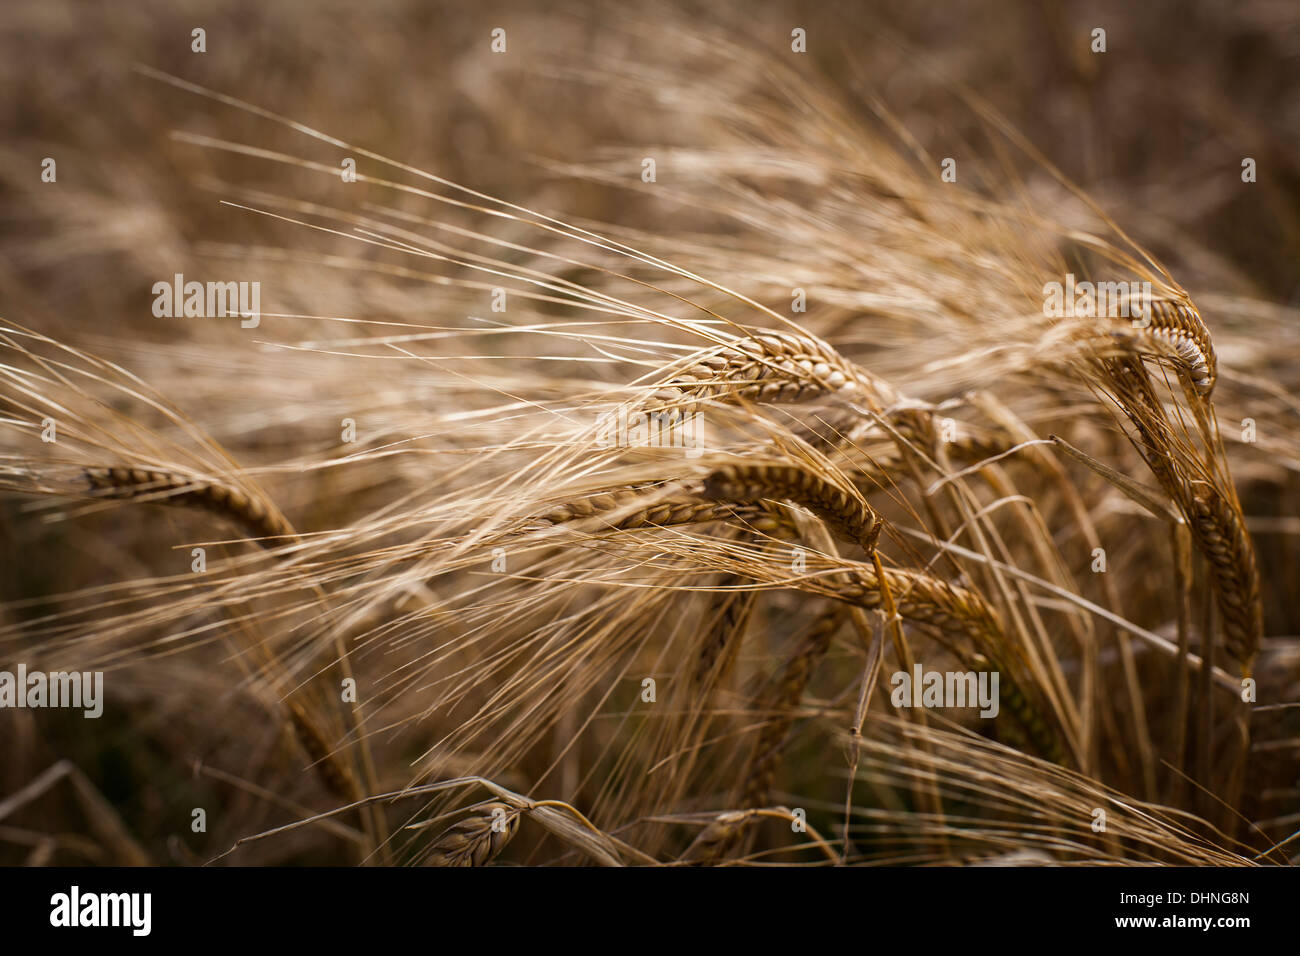 Malting barley at the point of harvest Stock Photo